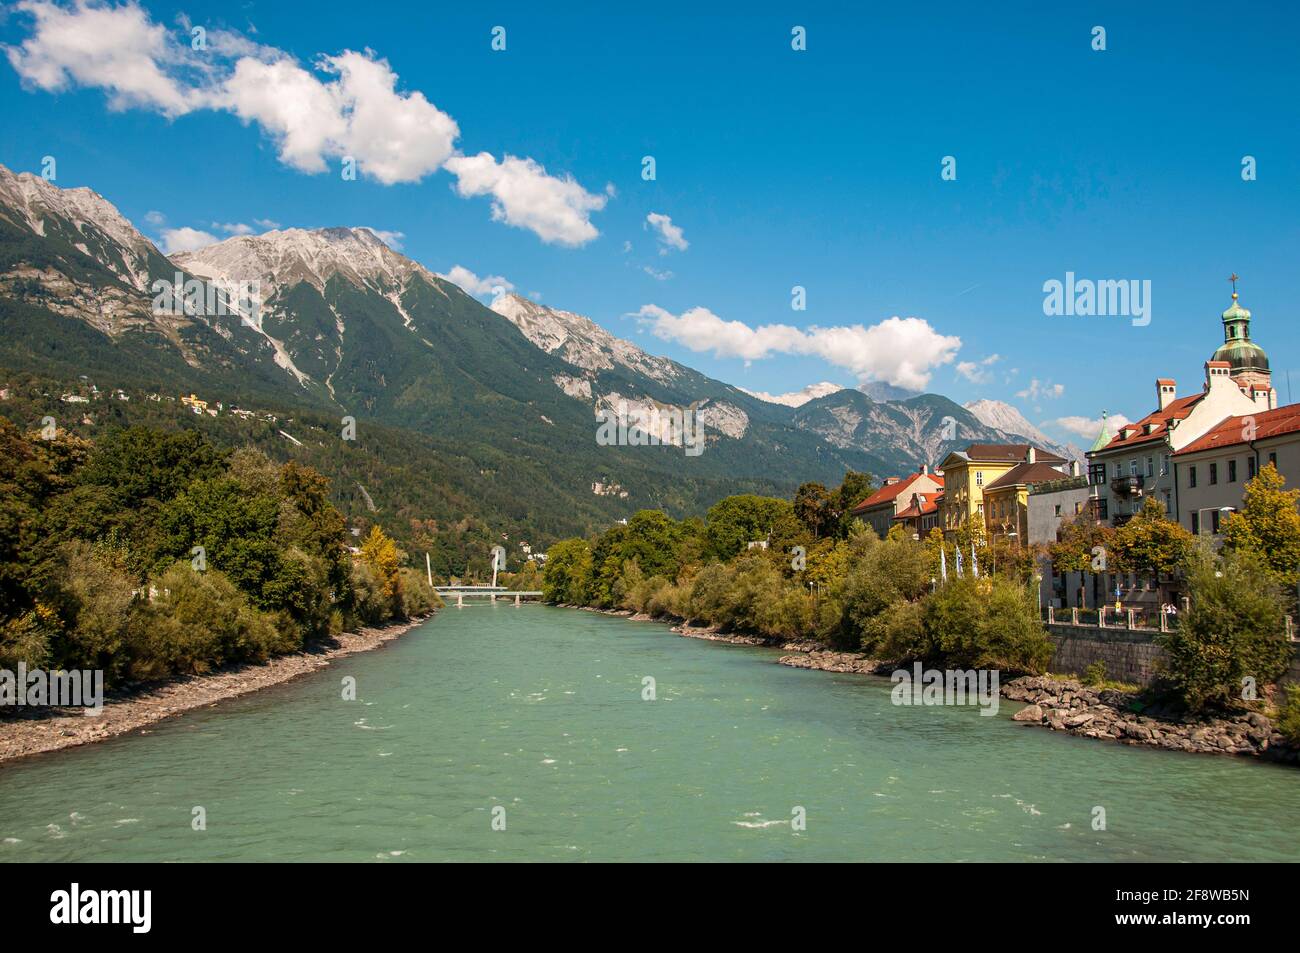 Dramatic view of the Alps in Innsbruck Austria from downtown on a nice sunny day Stock Photo